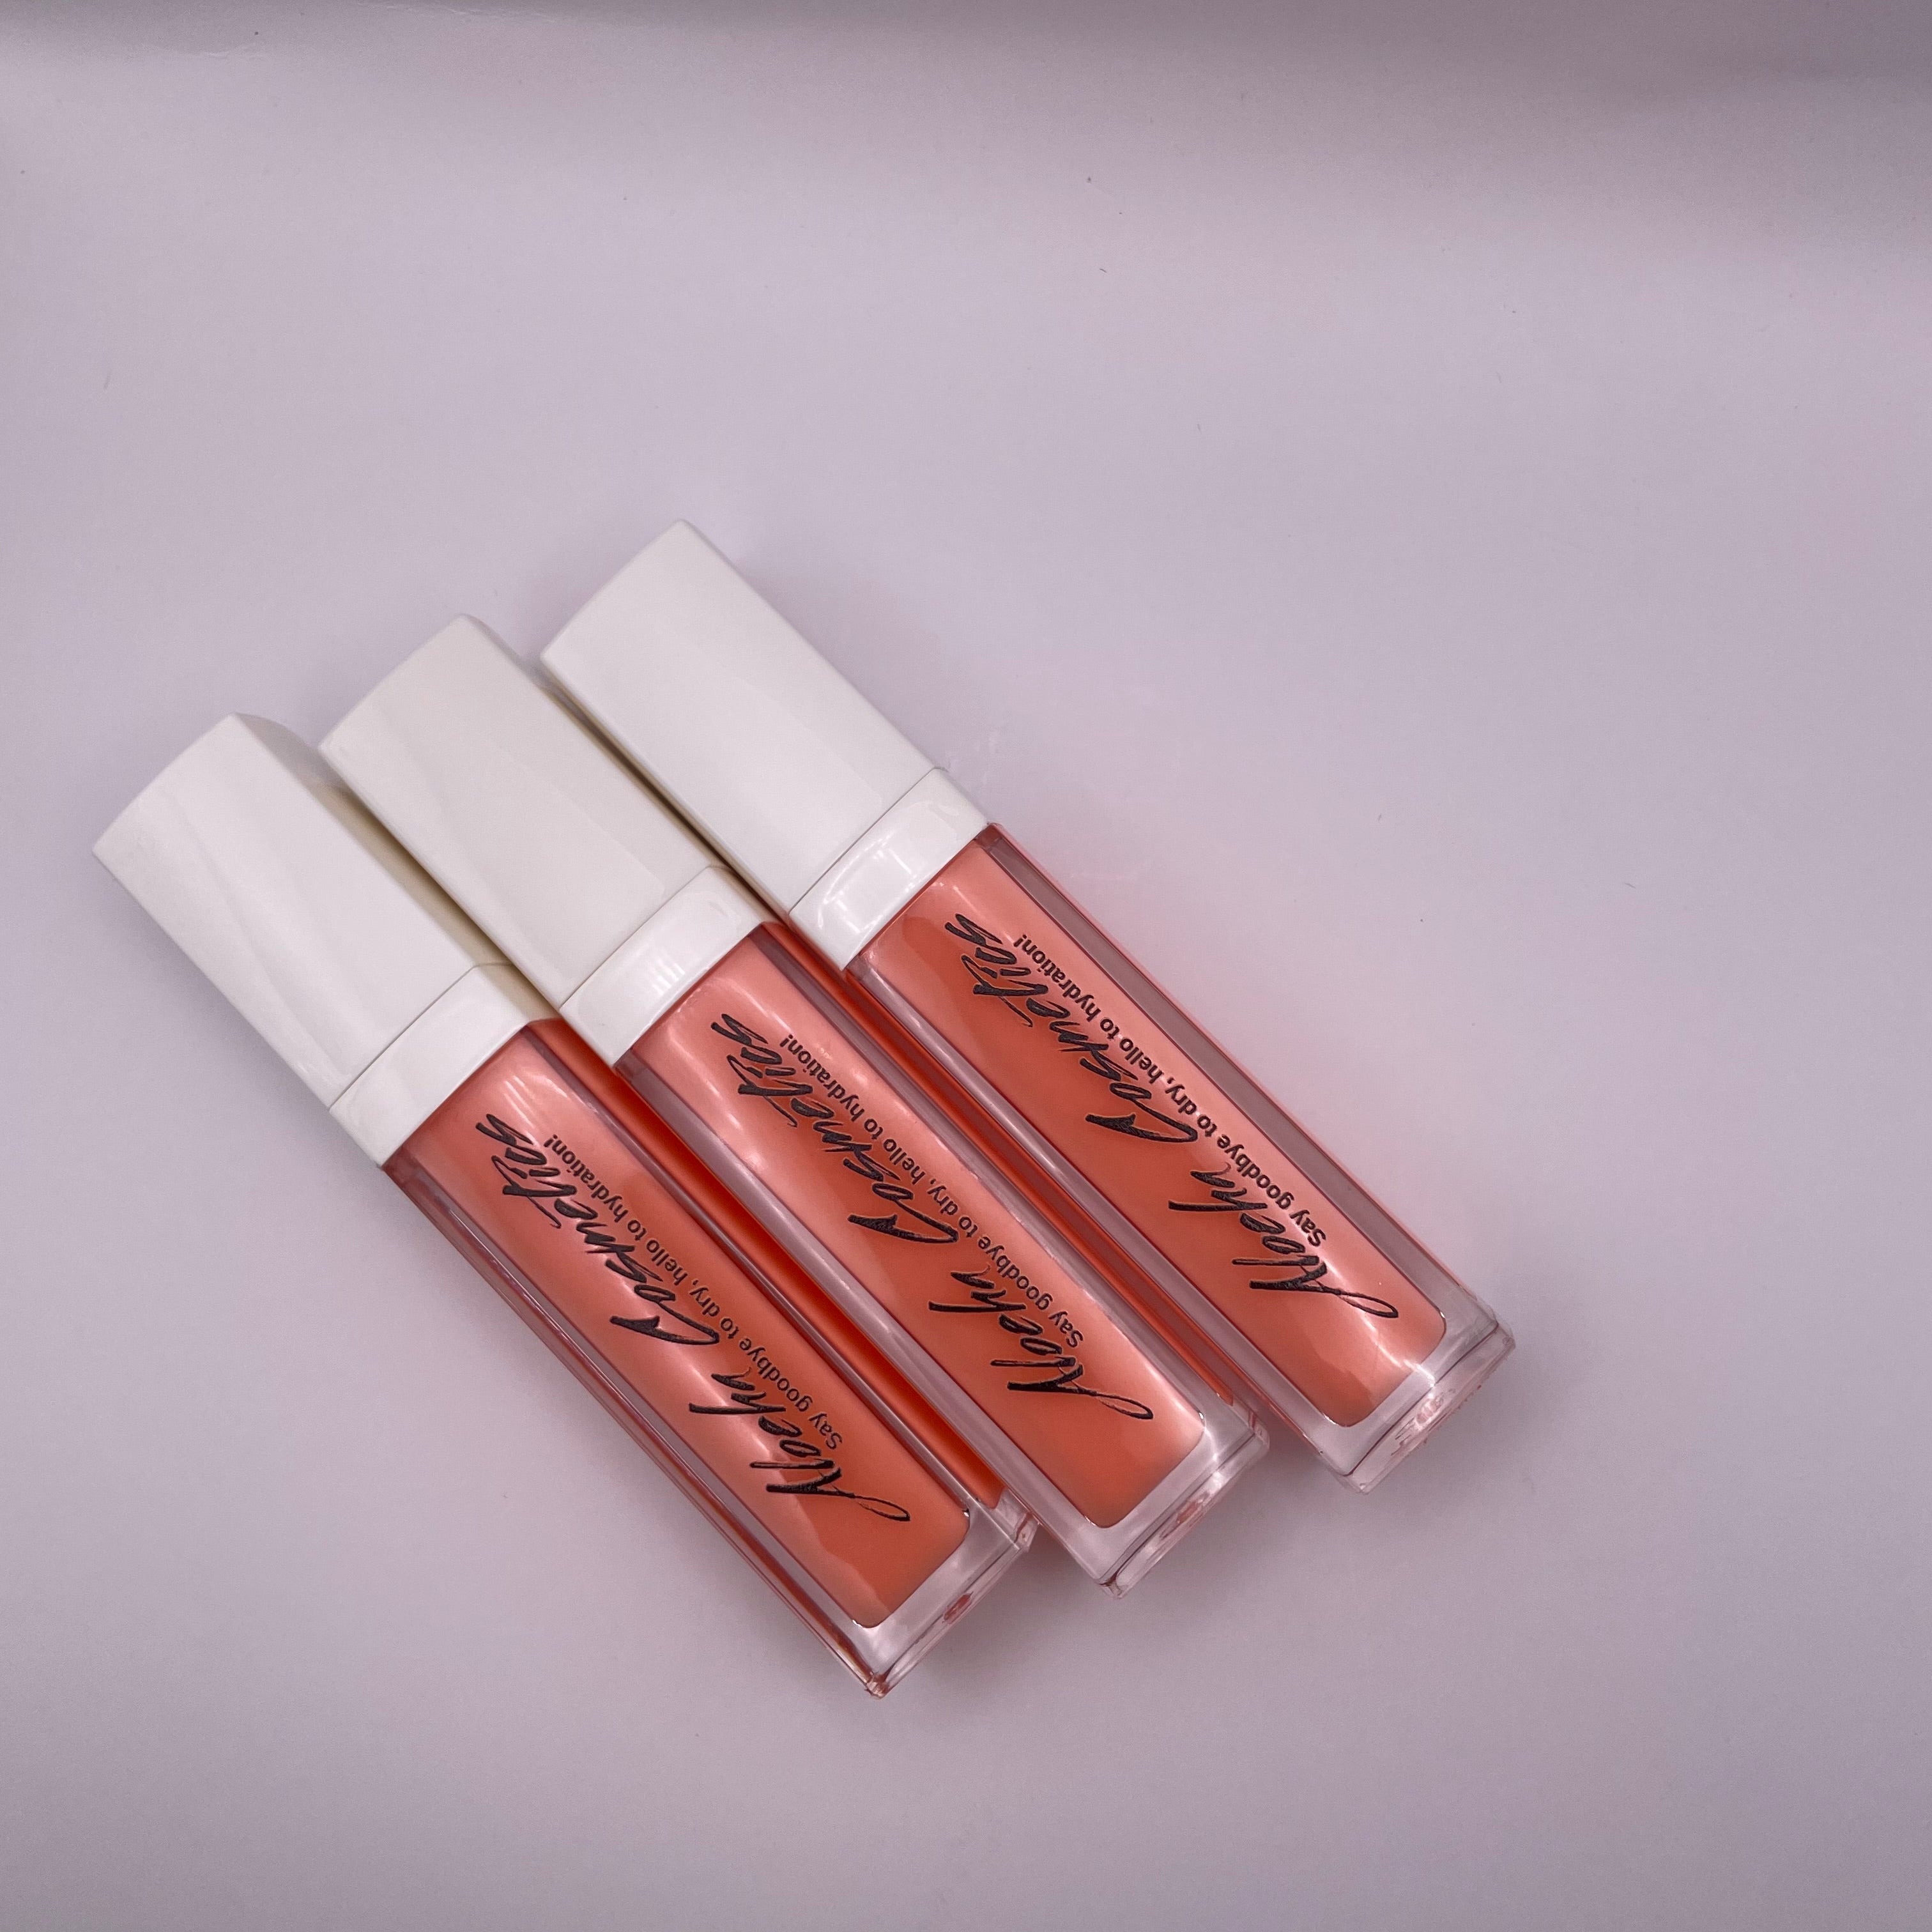 Chroma luxe color changing lip gloss